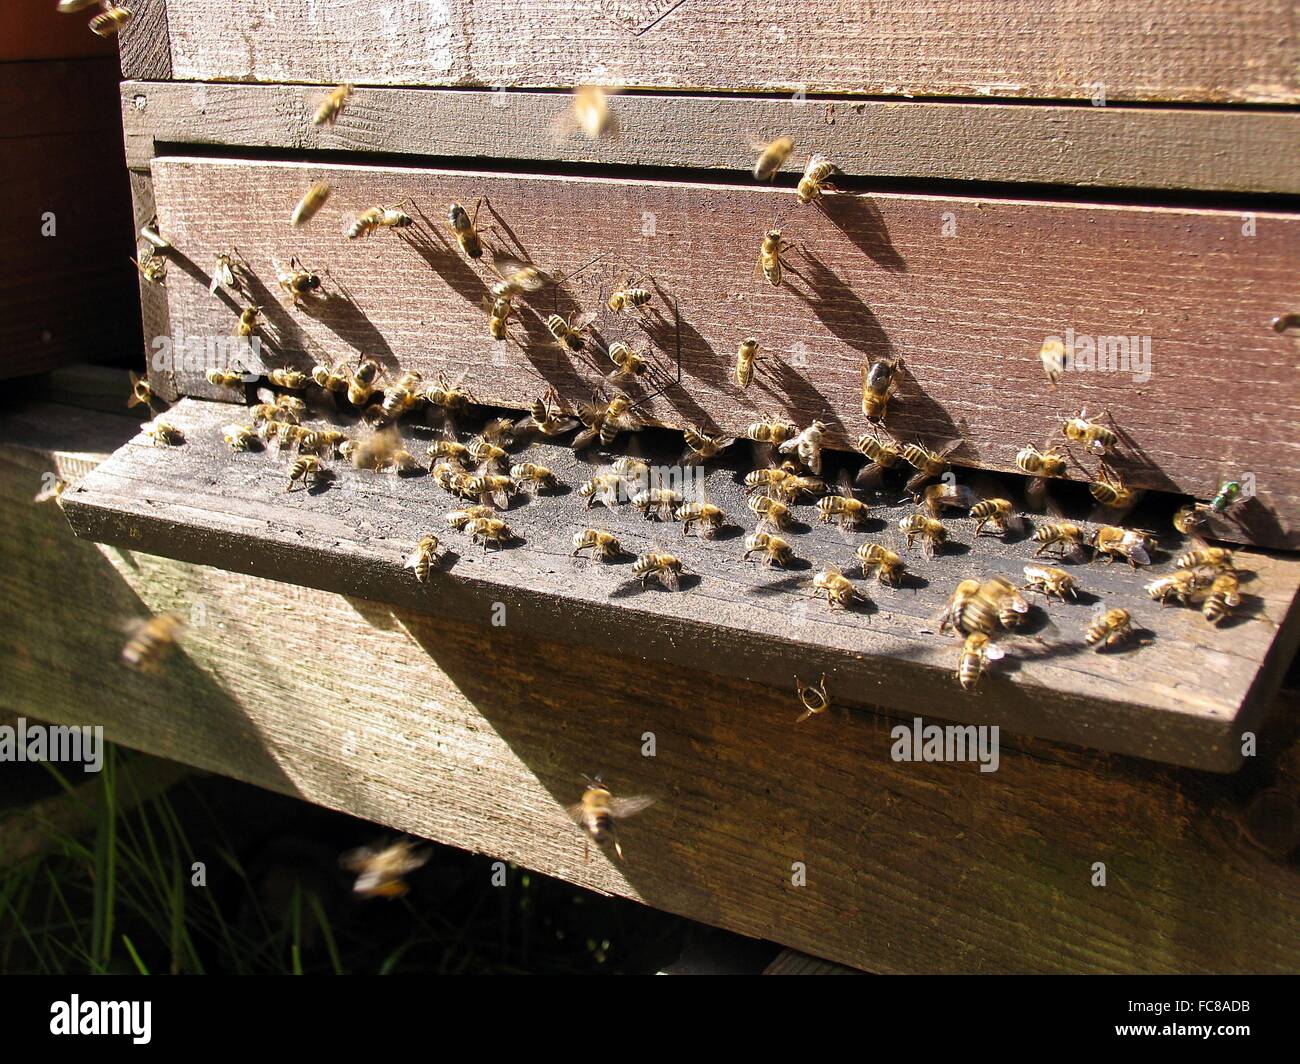 Fanning bees at the hive entrance of a beehive. With their wings the bees are fanning fresh air into the hive and moist air out of the hive. Beekeeping, Kleinschmalkalden, Thuringia, Germany, Europe Date: 27.07.2012 Stock Photo